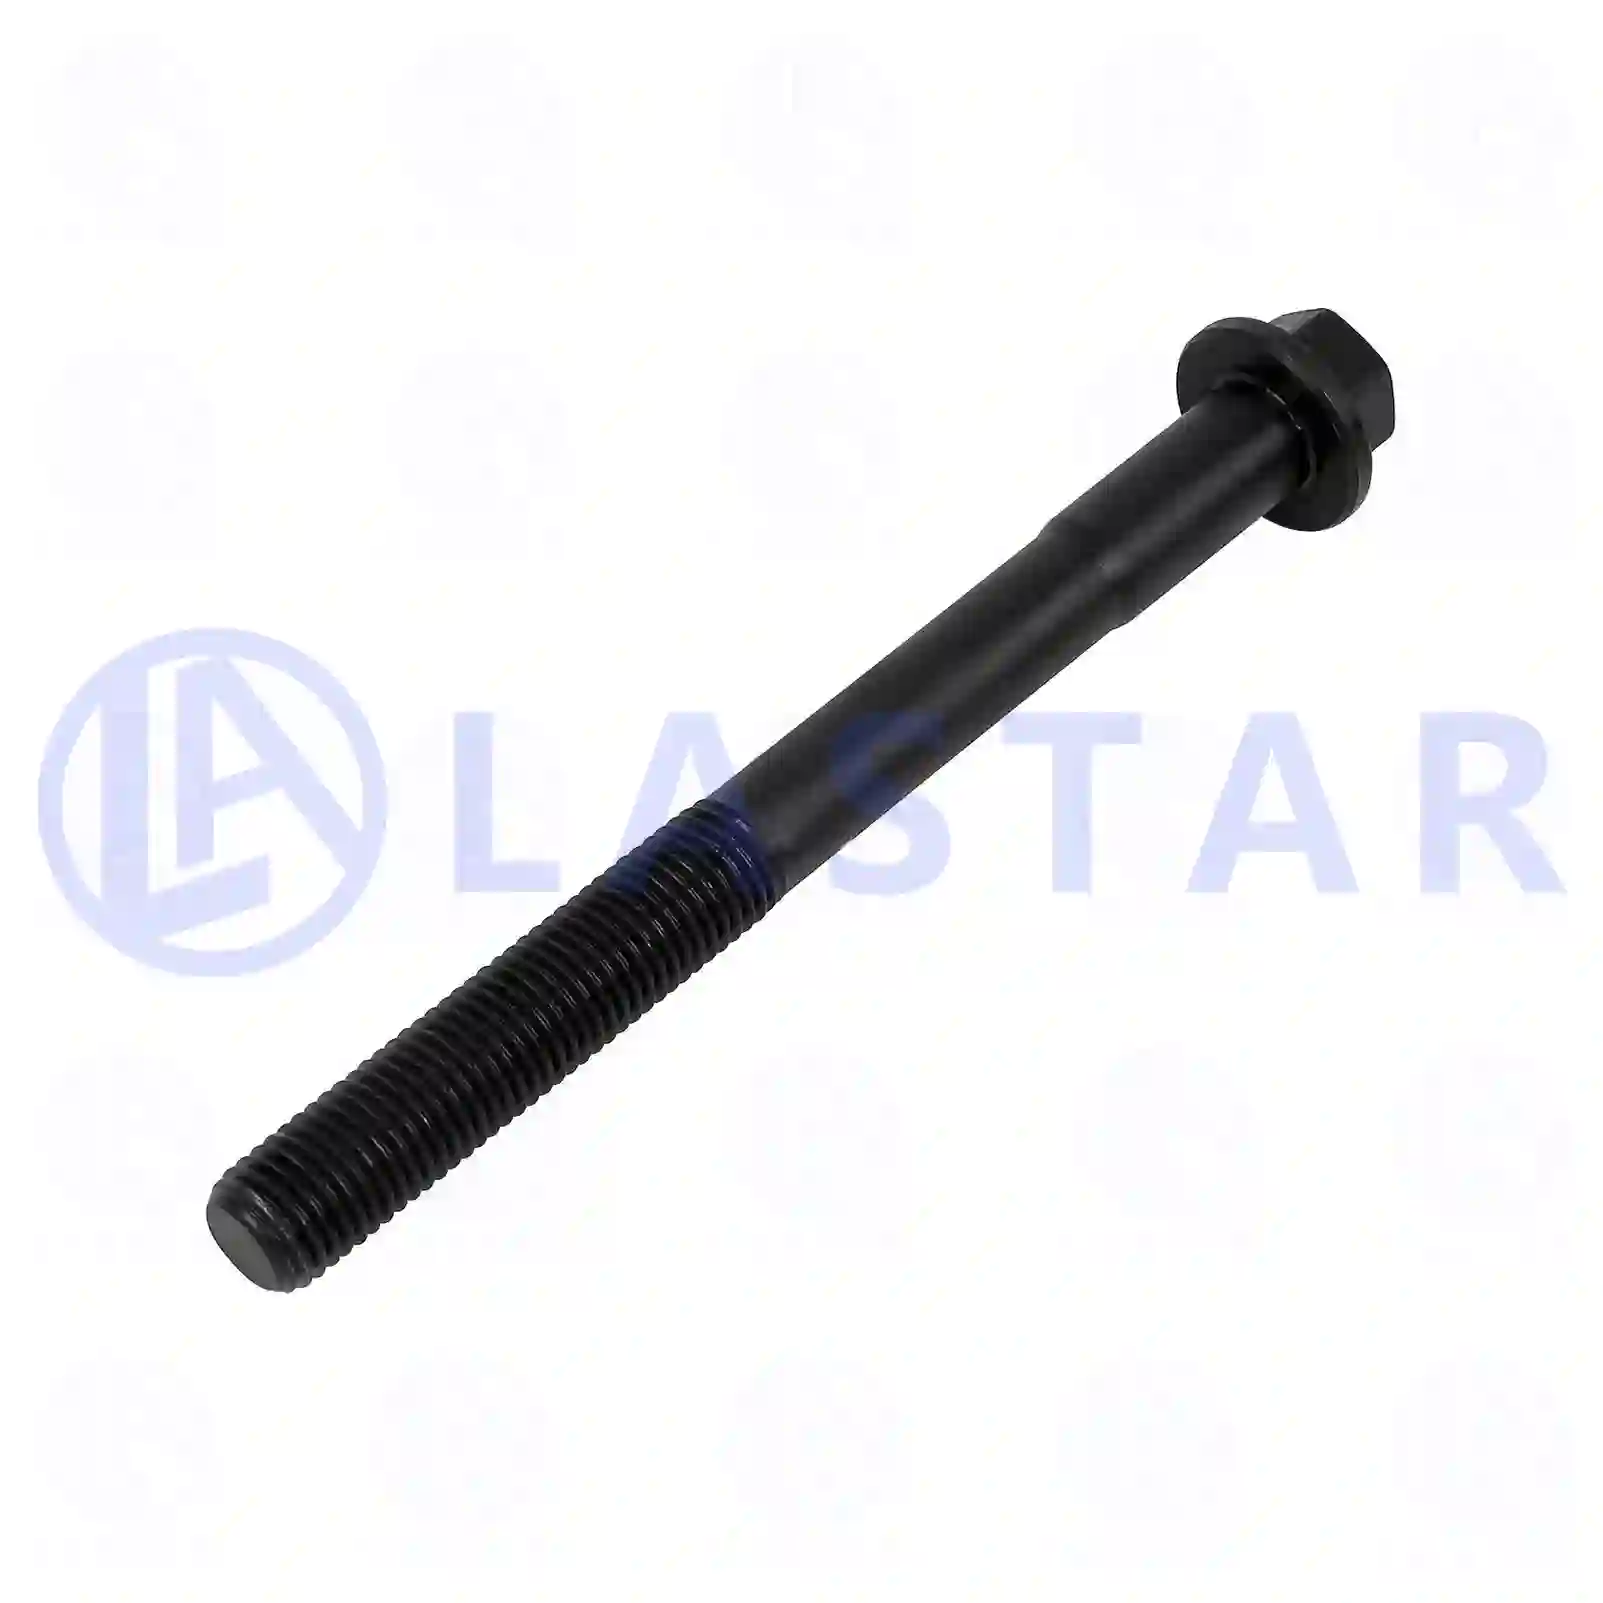  Cylinder head screw || Lastar Spare Part | Truck Spare Parts, Auotomotive Spare Parts